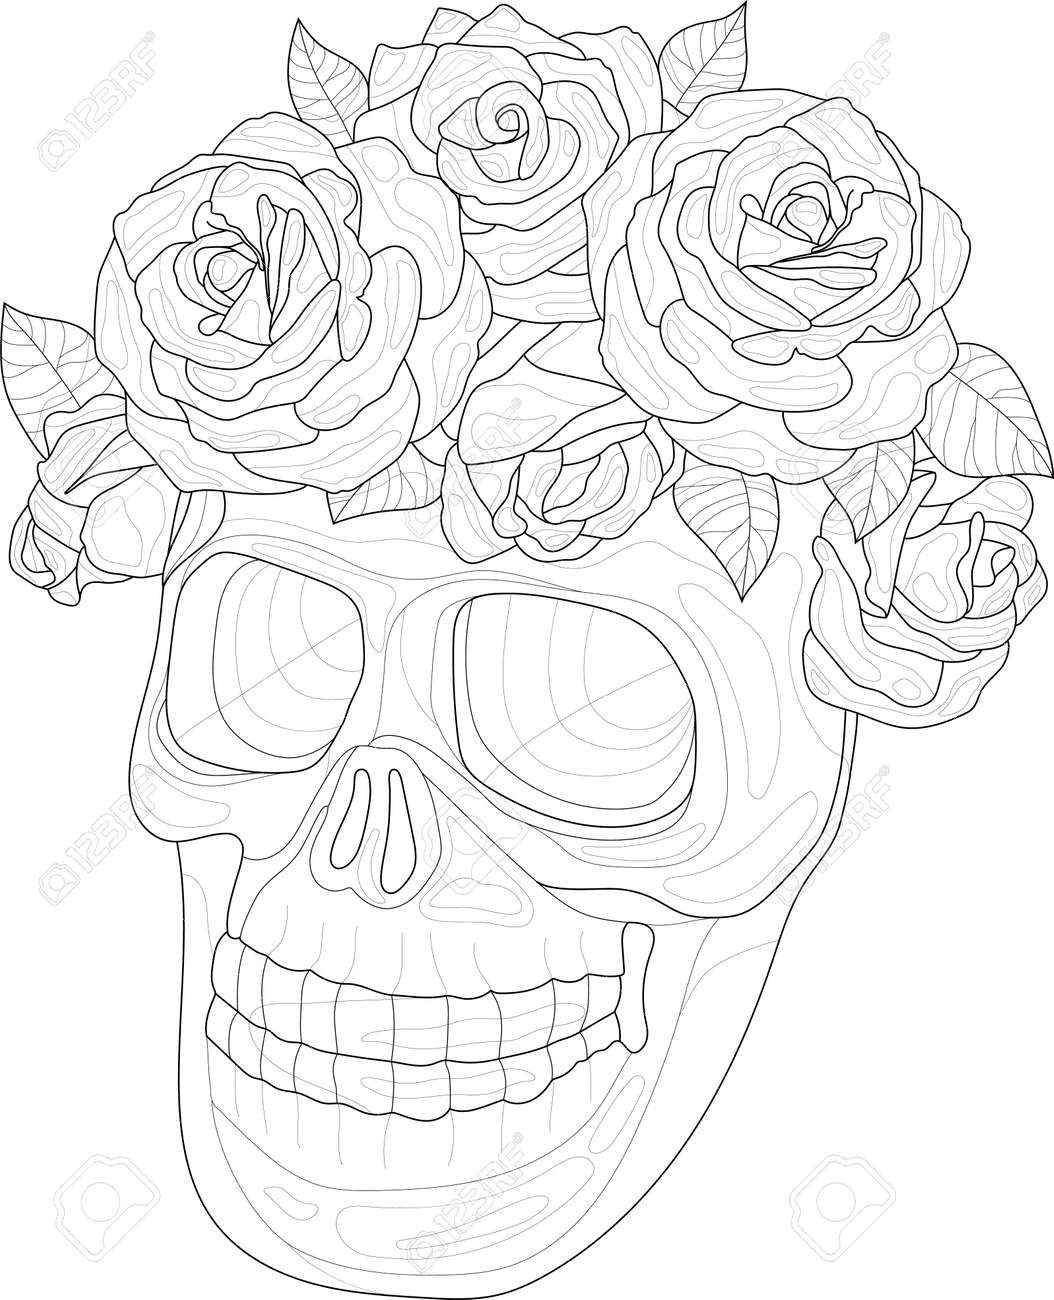 Realistic skull with rose peony flower crown sketch template cartoon graphic vector illustration for halloween in black and white for games background pattern decor coloring paper page book royalty free svg cliparts